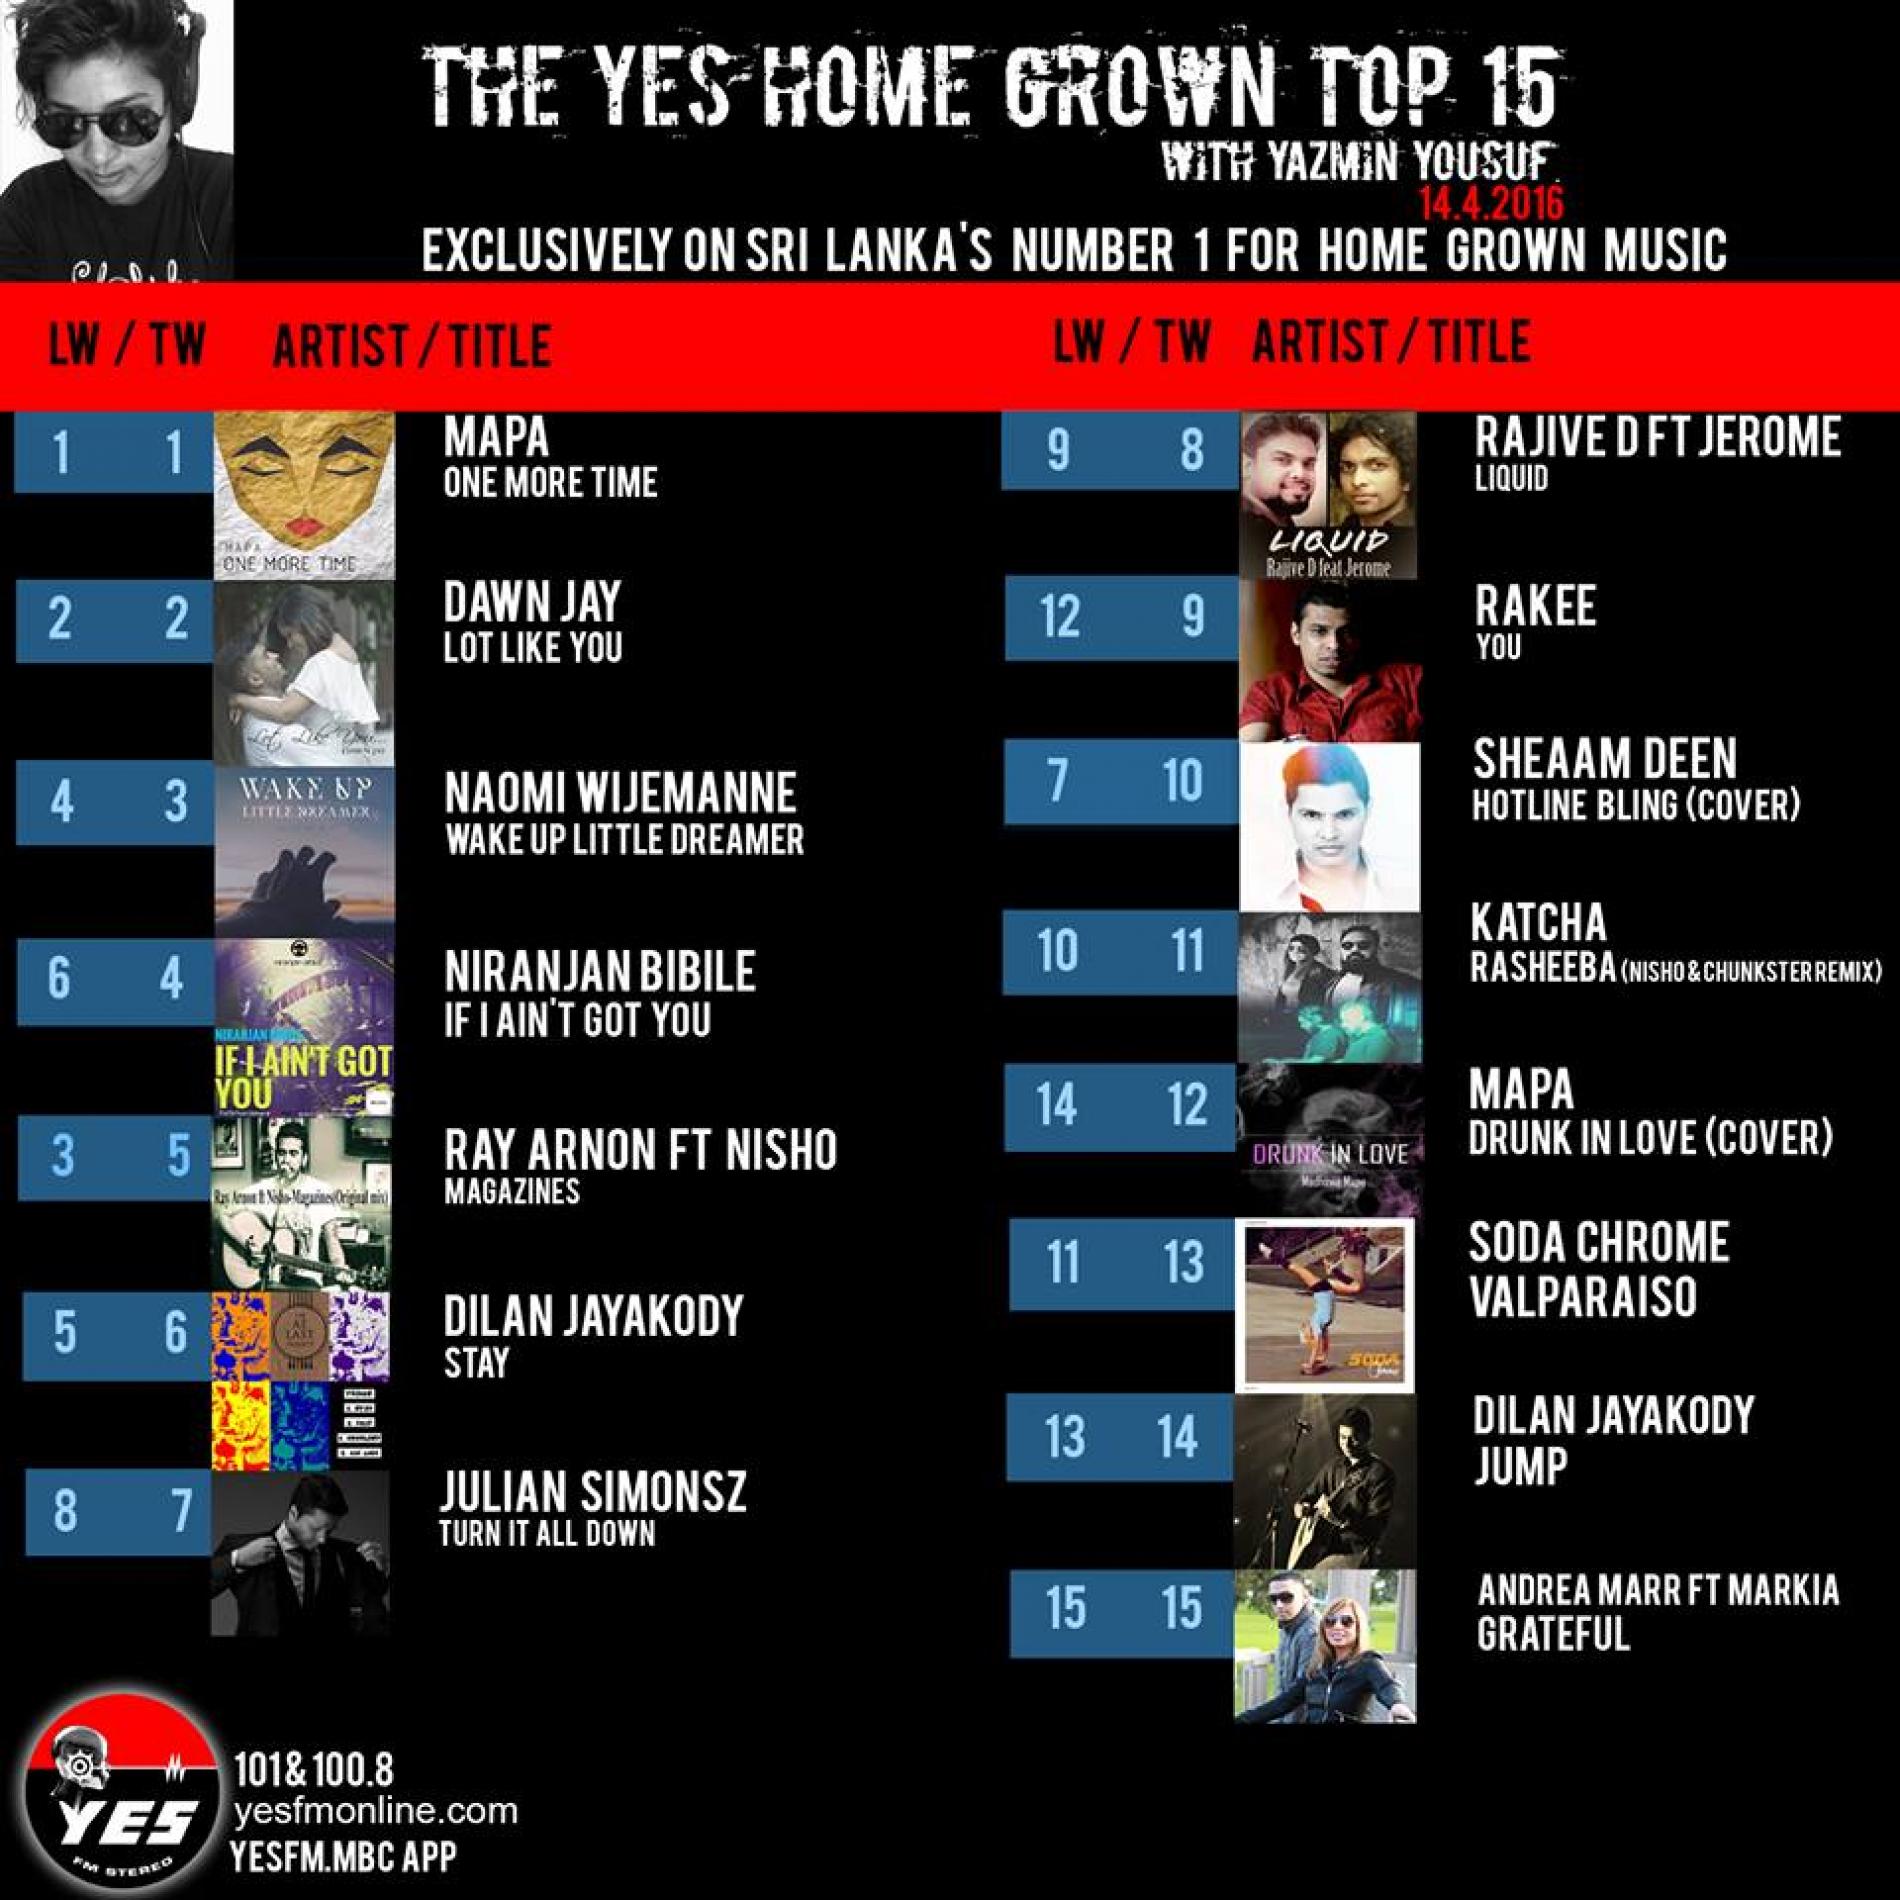 Its Week 2 For Mapa At Number 1 On The YES Home Grown Top 15